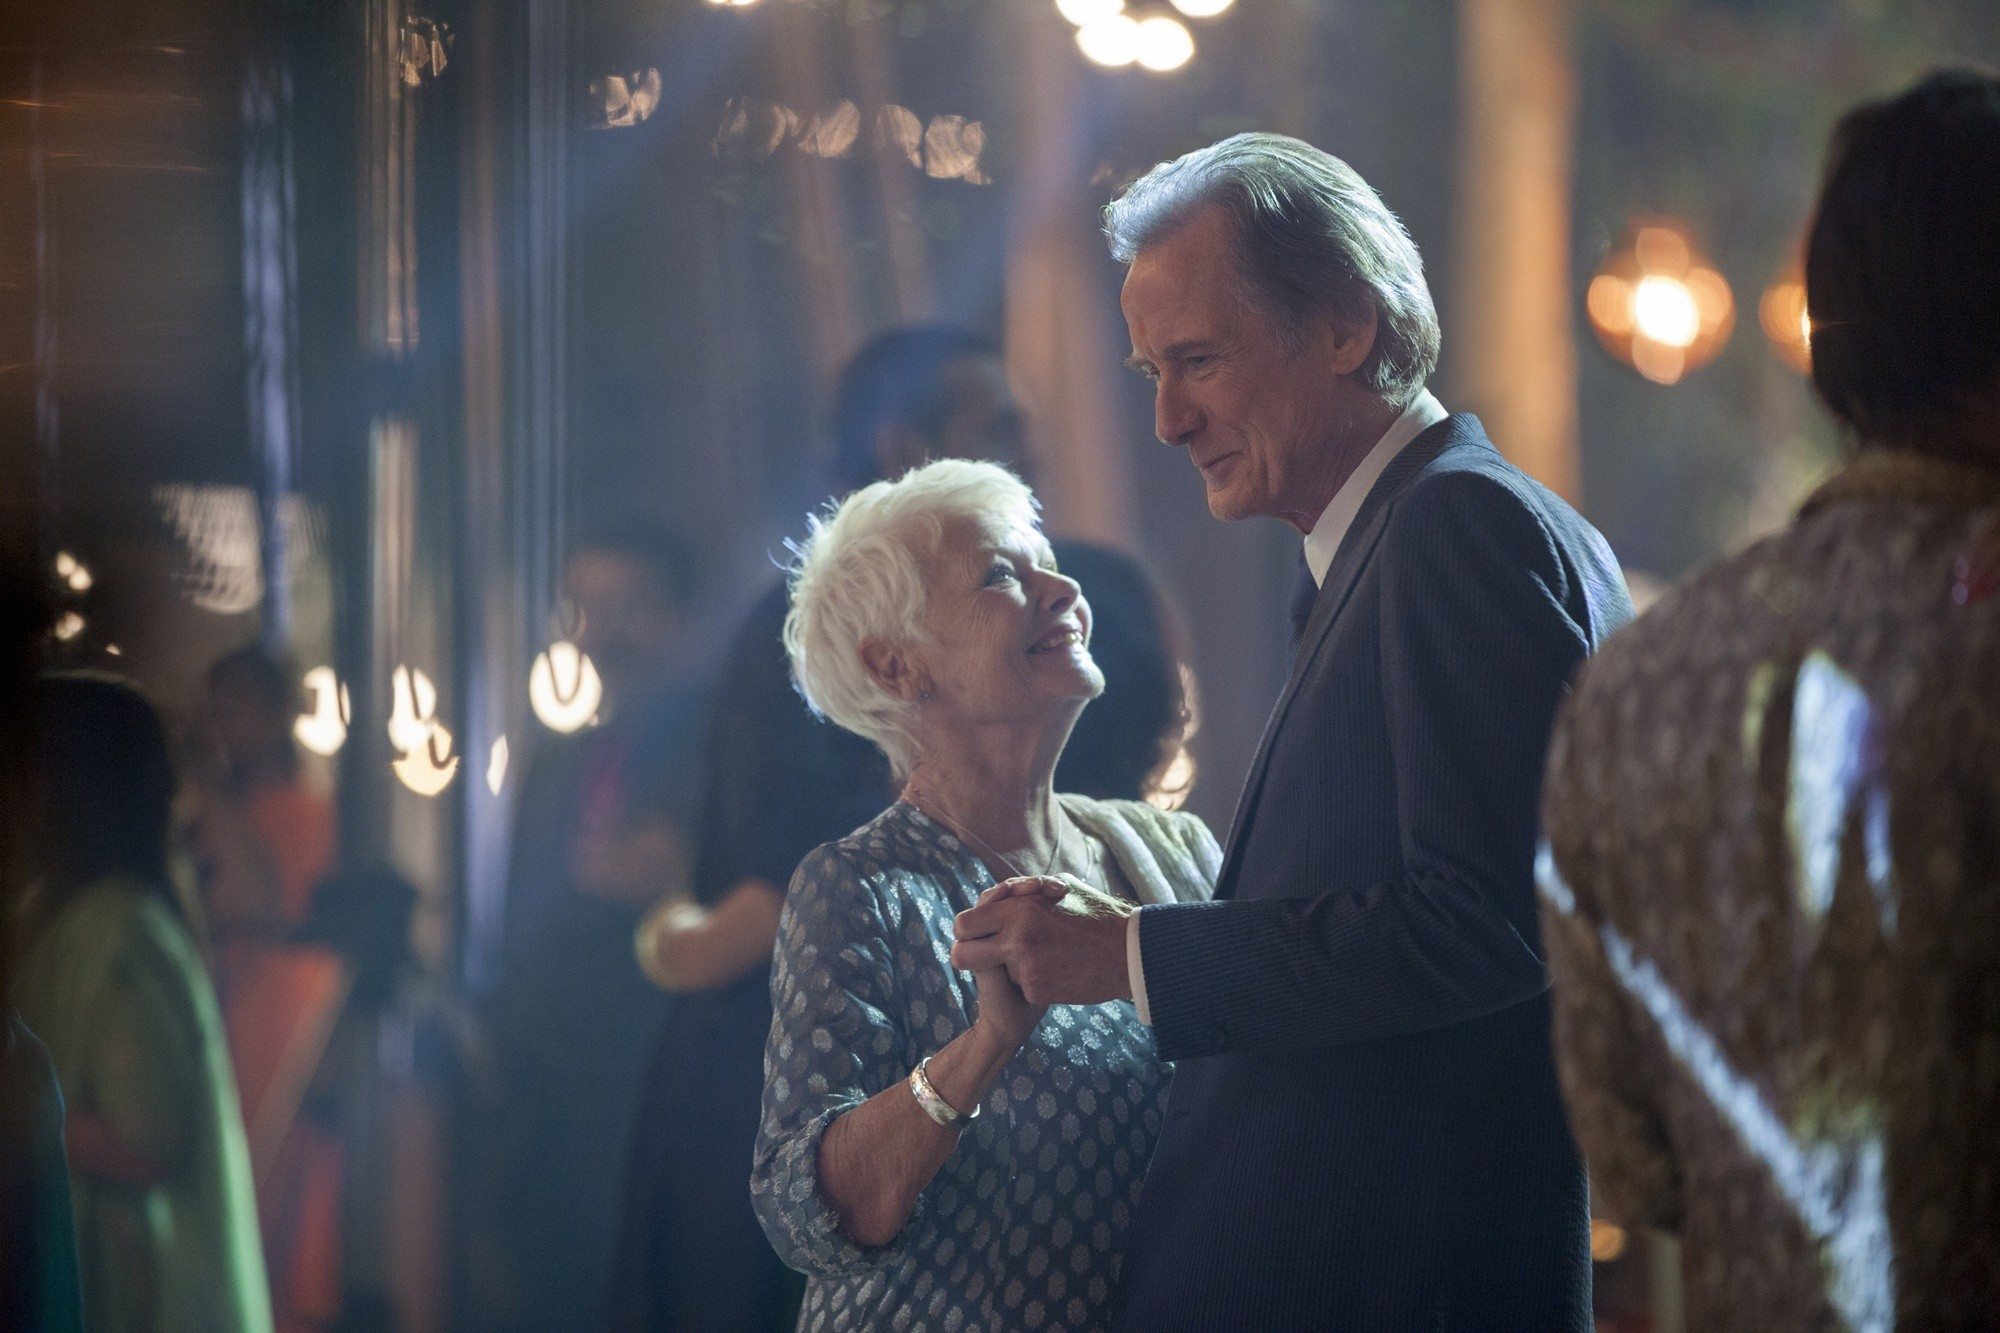 Judi Dench stars as Evelyn Greenslade and Bill Nighy stars as Douglas Ainslie in Fox Searchlight Pictures' The Second Best Exotic Marigold Hotel (2015). Photo credit by Laurie Sparham.